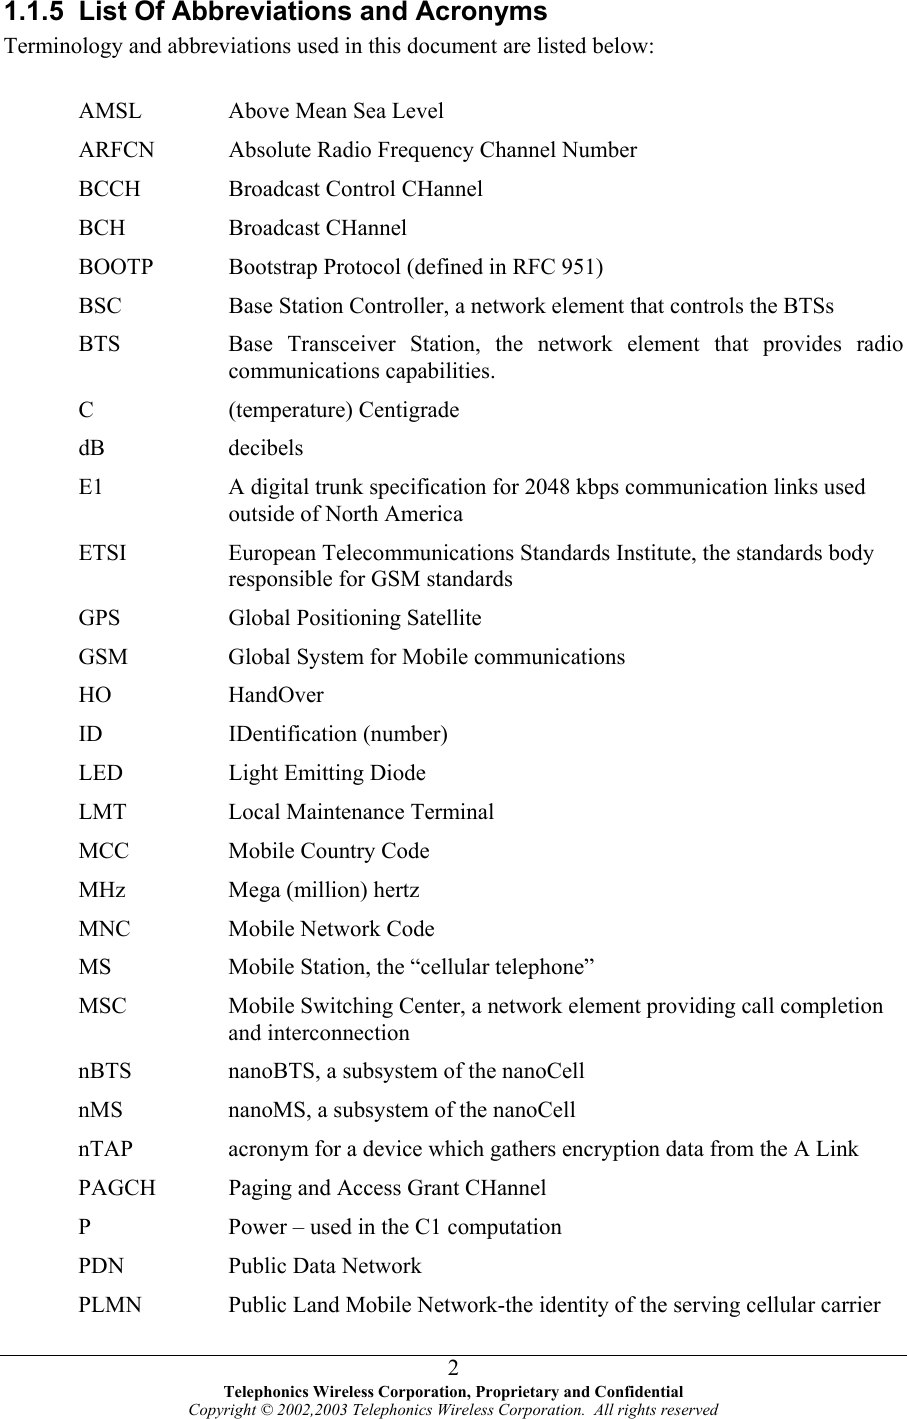  1.1.5  List Of Abbreviations and Acronyms Terminology and abbreviations used in this document are listed below:  AMSL  Above Mean Sea Level ARFCN      Absolute Radio Frequency Channel Number BCCH  Broadcast Control CHannel BCH Broadcast CHannel BOOTP     Bootstrap Protocol (defined in RFC 951) BSC  Base Station Controller, a network element that controls the BTSs BTS  Base Transceiver Station, the network element that provides radio communications capabilities. C (temperature) Centigrade dB decibels E1  A digital trunk specification for 2048 kbps communication links used outside of North America ETSI  European Telecommunications Standards Institute, the standards body responsible for GSM standards GPS  Global Positioning Satellite GSM  Global System for Mobile communications HO HandOver ID IDentification (number) LED  Light Emitting Diode LMT  Local Maintenance Terminal MCC  Mobile Country Code MHz  Mega (million) hertz MNC  Mobile Network Code MS  Mobile Station, the “cellular telephone” MSC  Mobile Switching Center, a network element providing call completion and interconnection nBTS  nanoBTS, a subsystem of the nanoCell nMS  nanoMS, a subsystem of the nanoCell nTAP  acronym for a device which gathers encryption data from the A Link PAGCH      Paging and Access Grant CHannel P  Power – used in the C1 computation PDN  Public Data Network PLMN  Public Land Mobile Network-the identity of the serving cellular carrier  Telephonics Wireless Corporation, Proprietary and Confidential Copyright © 2002,2003 Telephonics Wireless Corporation.  All rights reserved 2